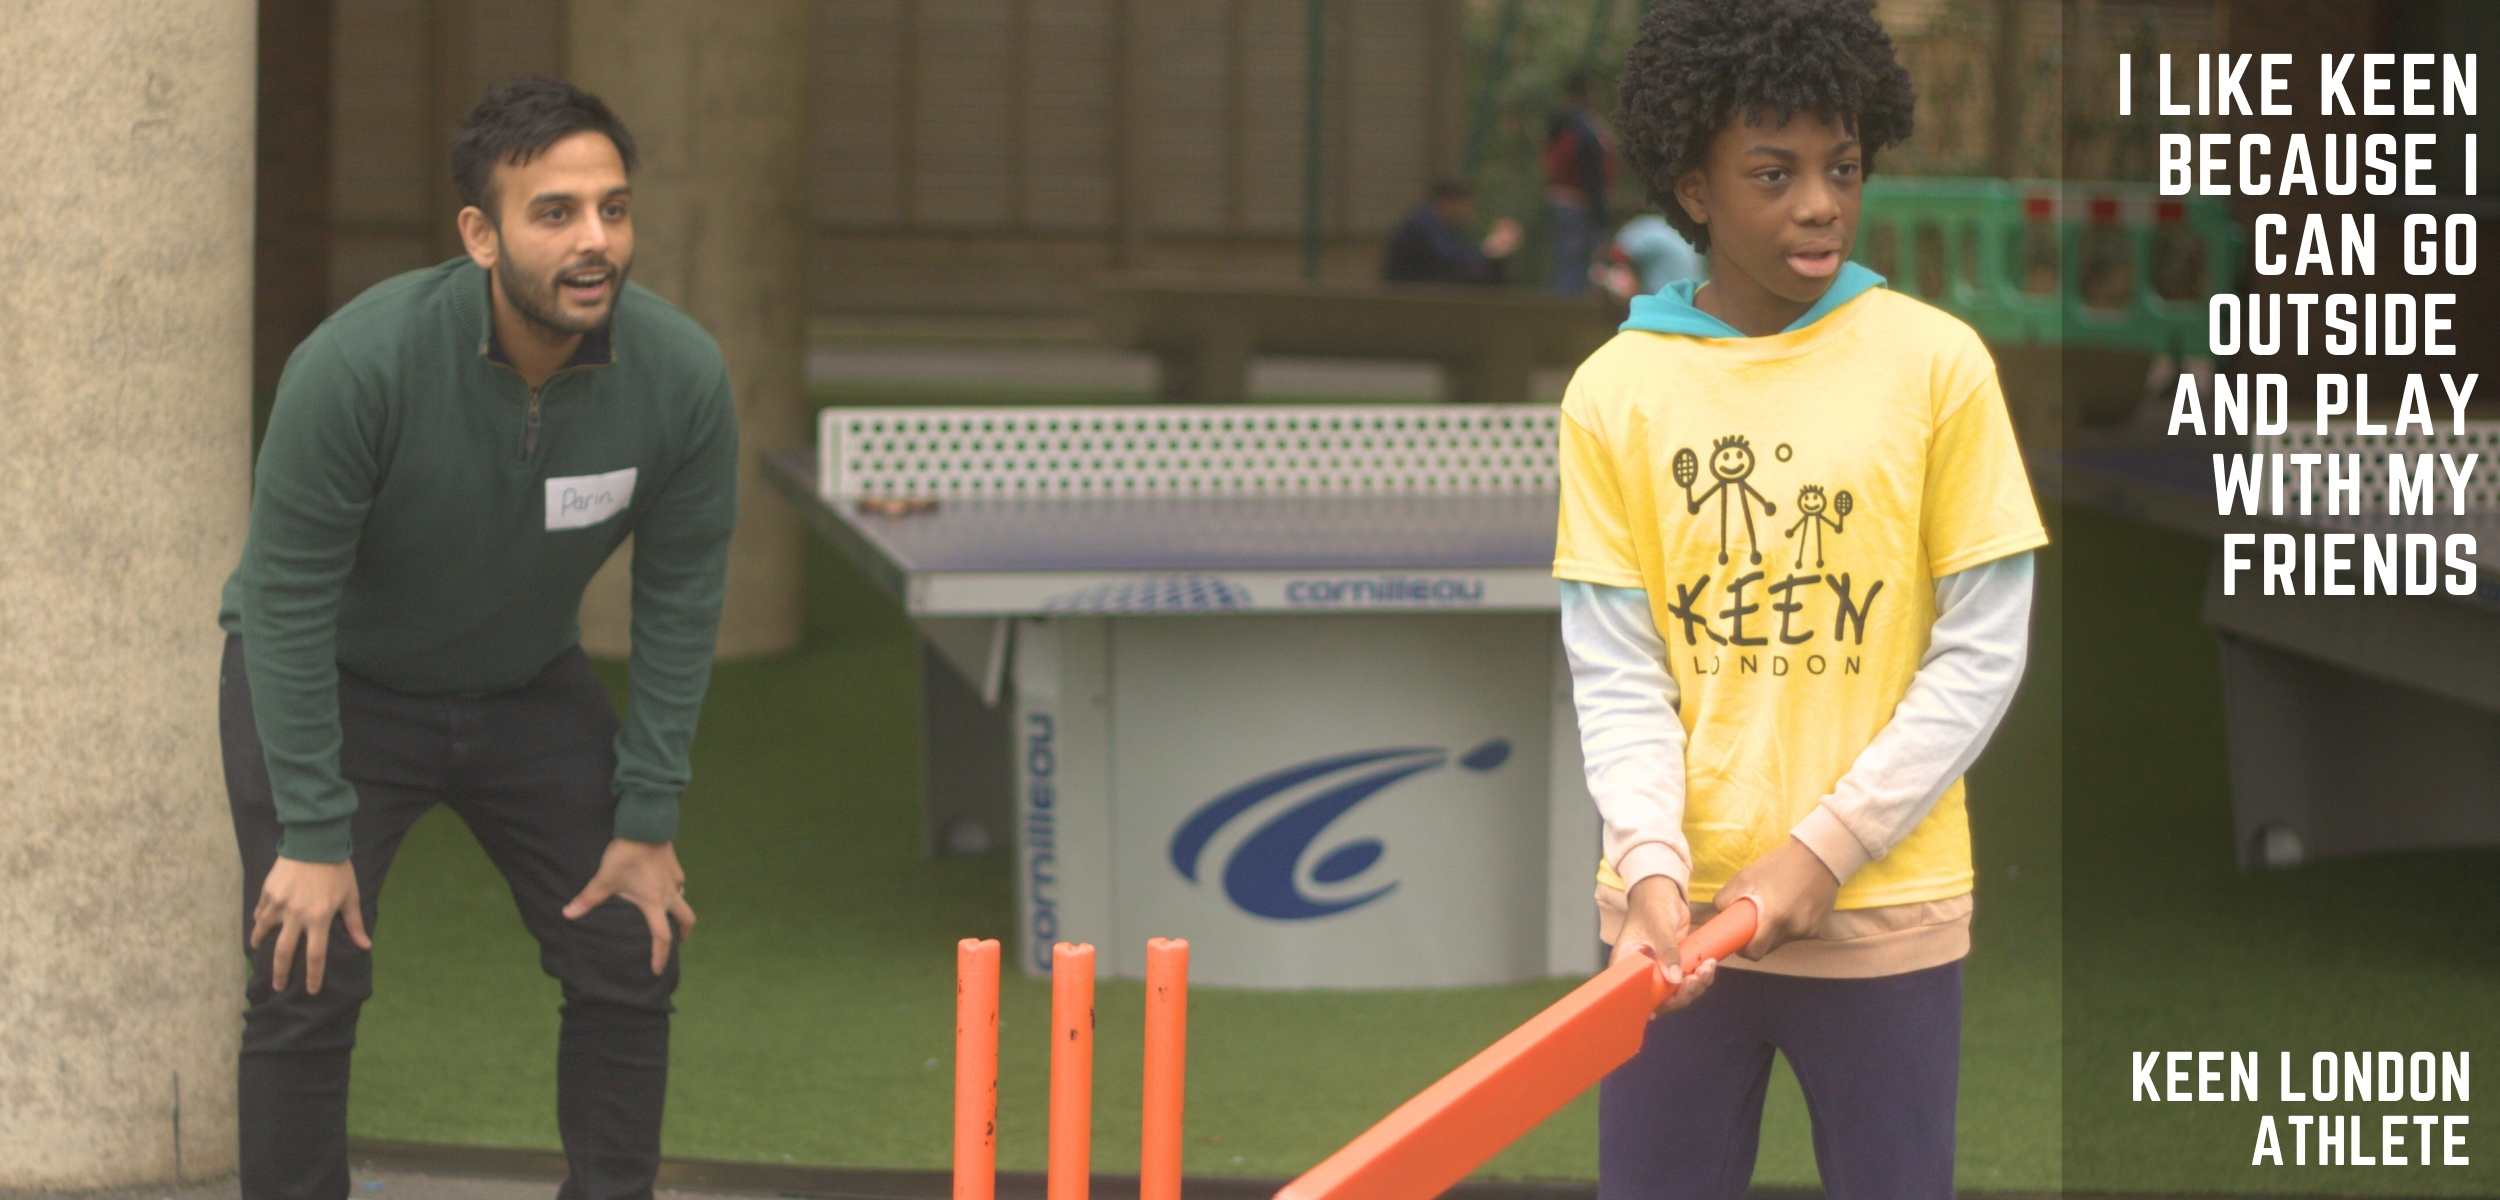 A determined KEEN London athlete, wearing a KEEN T-shirt, grips a cricket bat, with his dedicated volunteer coach standing beside him, eagerly anticipating the incoming ball.